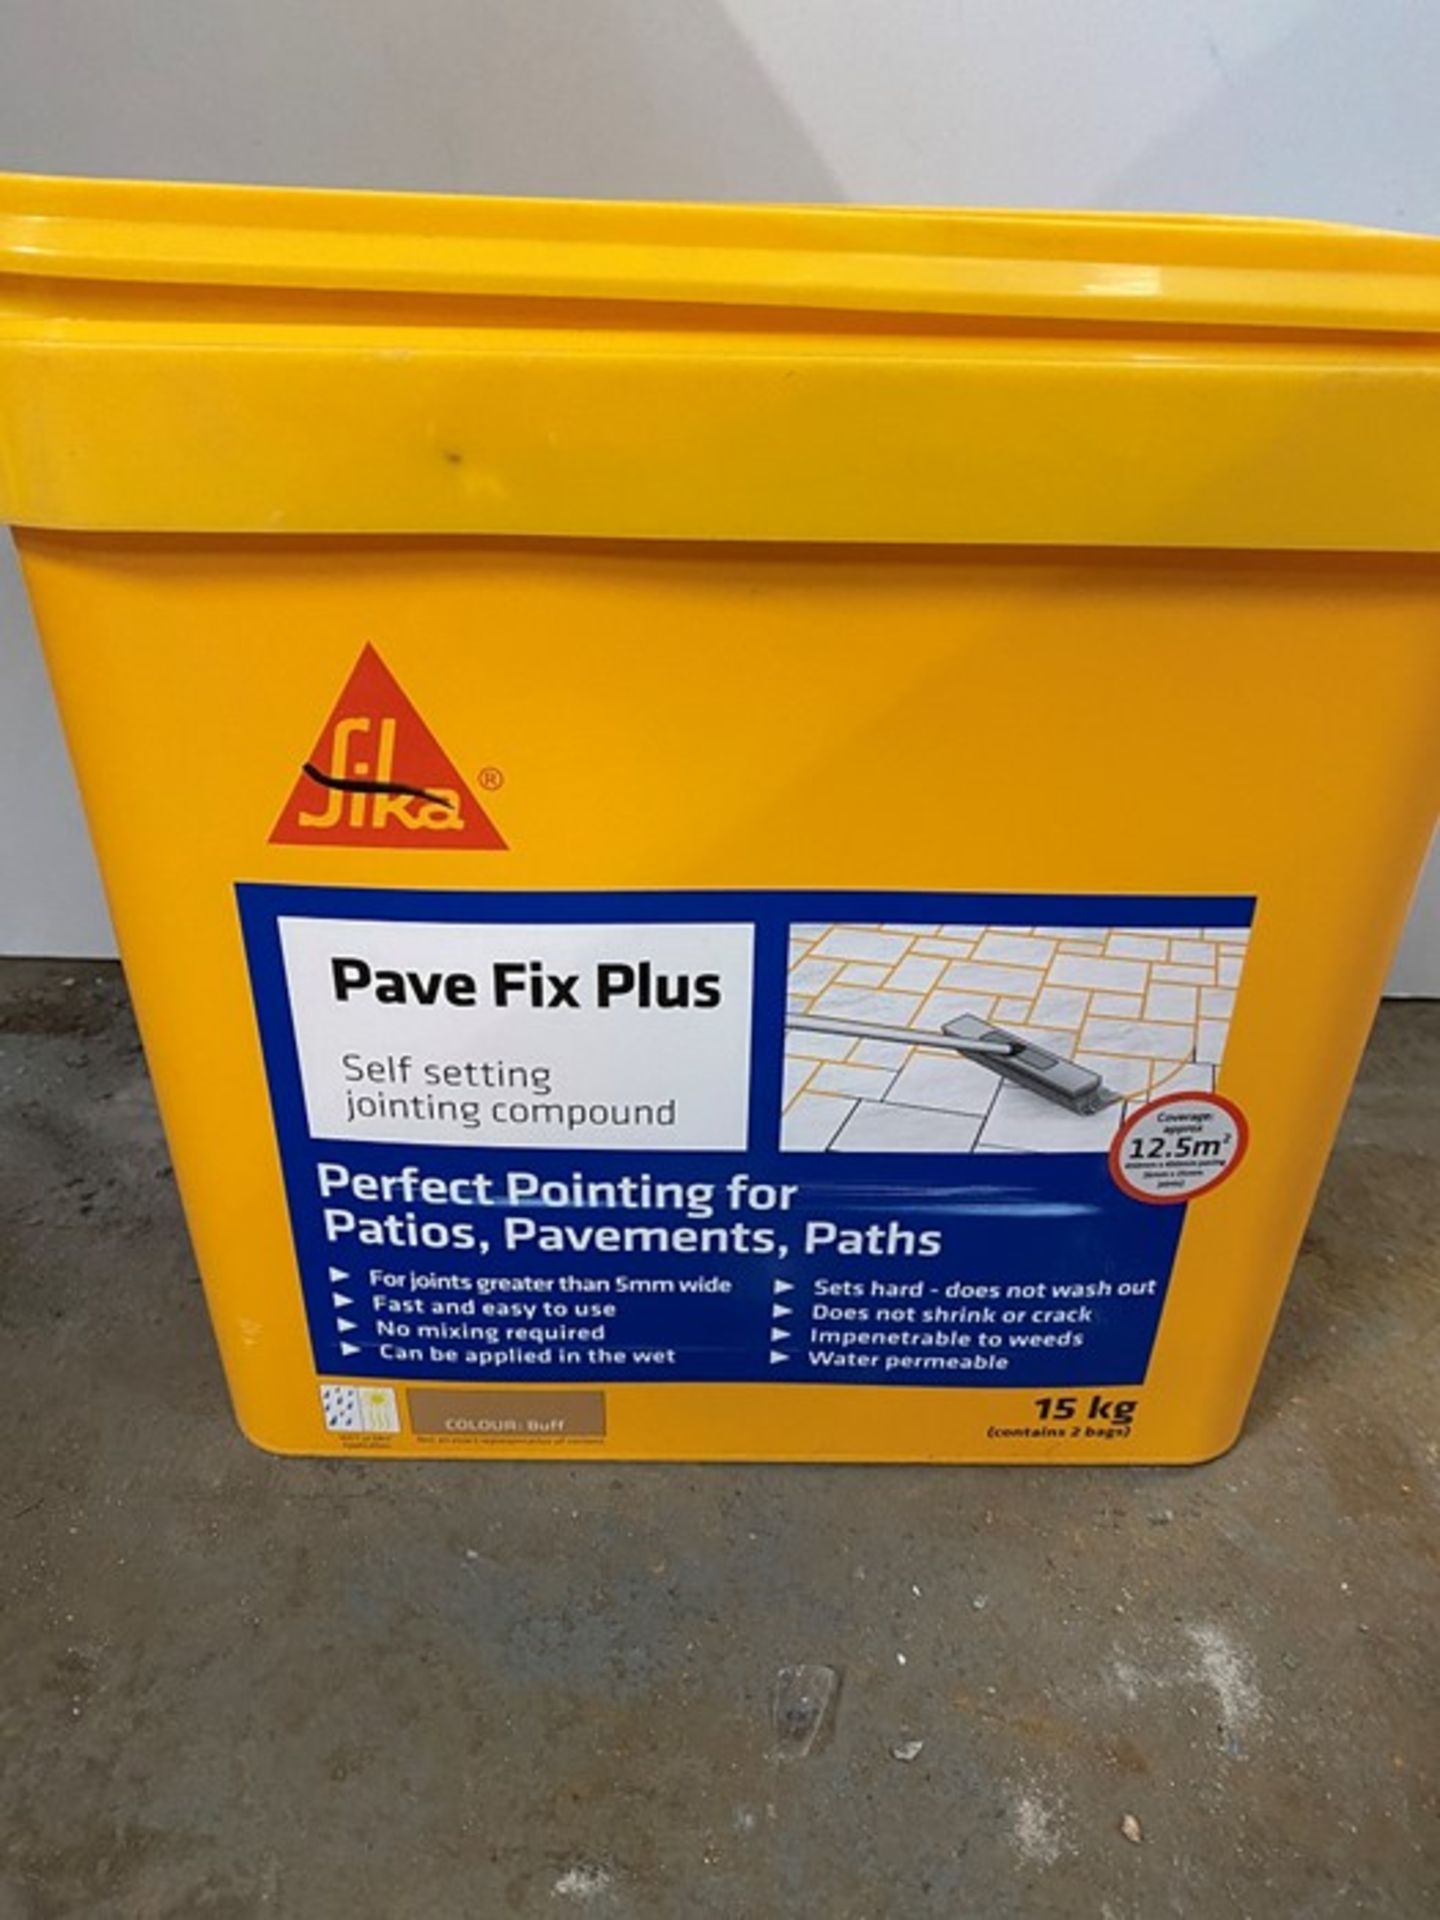 1 SIKA PAVE FIX PLUS BUFF 15KG / RRP £35.25 / PN - 701 (PUBLIC VIEWING AVAILABLE)